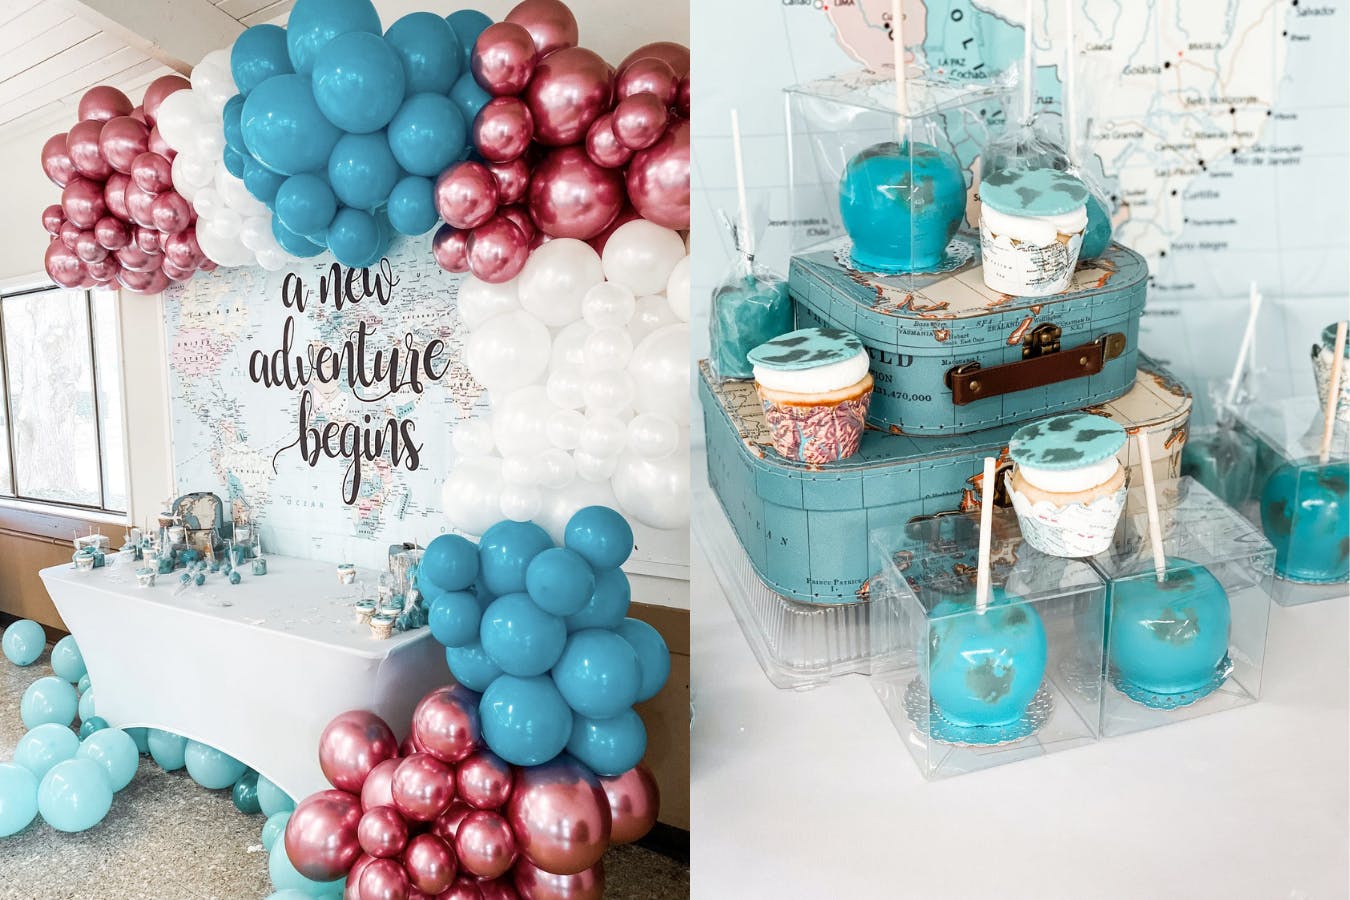 Travel-Themed Baby Shower With Metallic Blue and Pink Balloon Décor, Blue Vintage Suitcases, and Carmel Covered Apples Designed to Look Like Globes | PartySlate